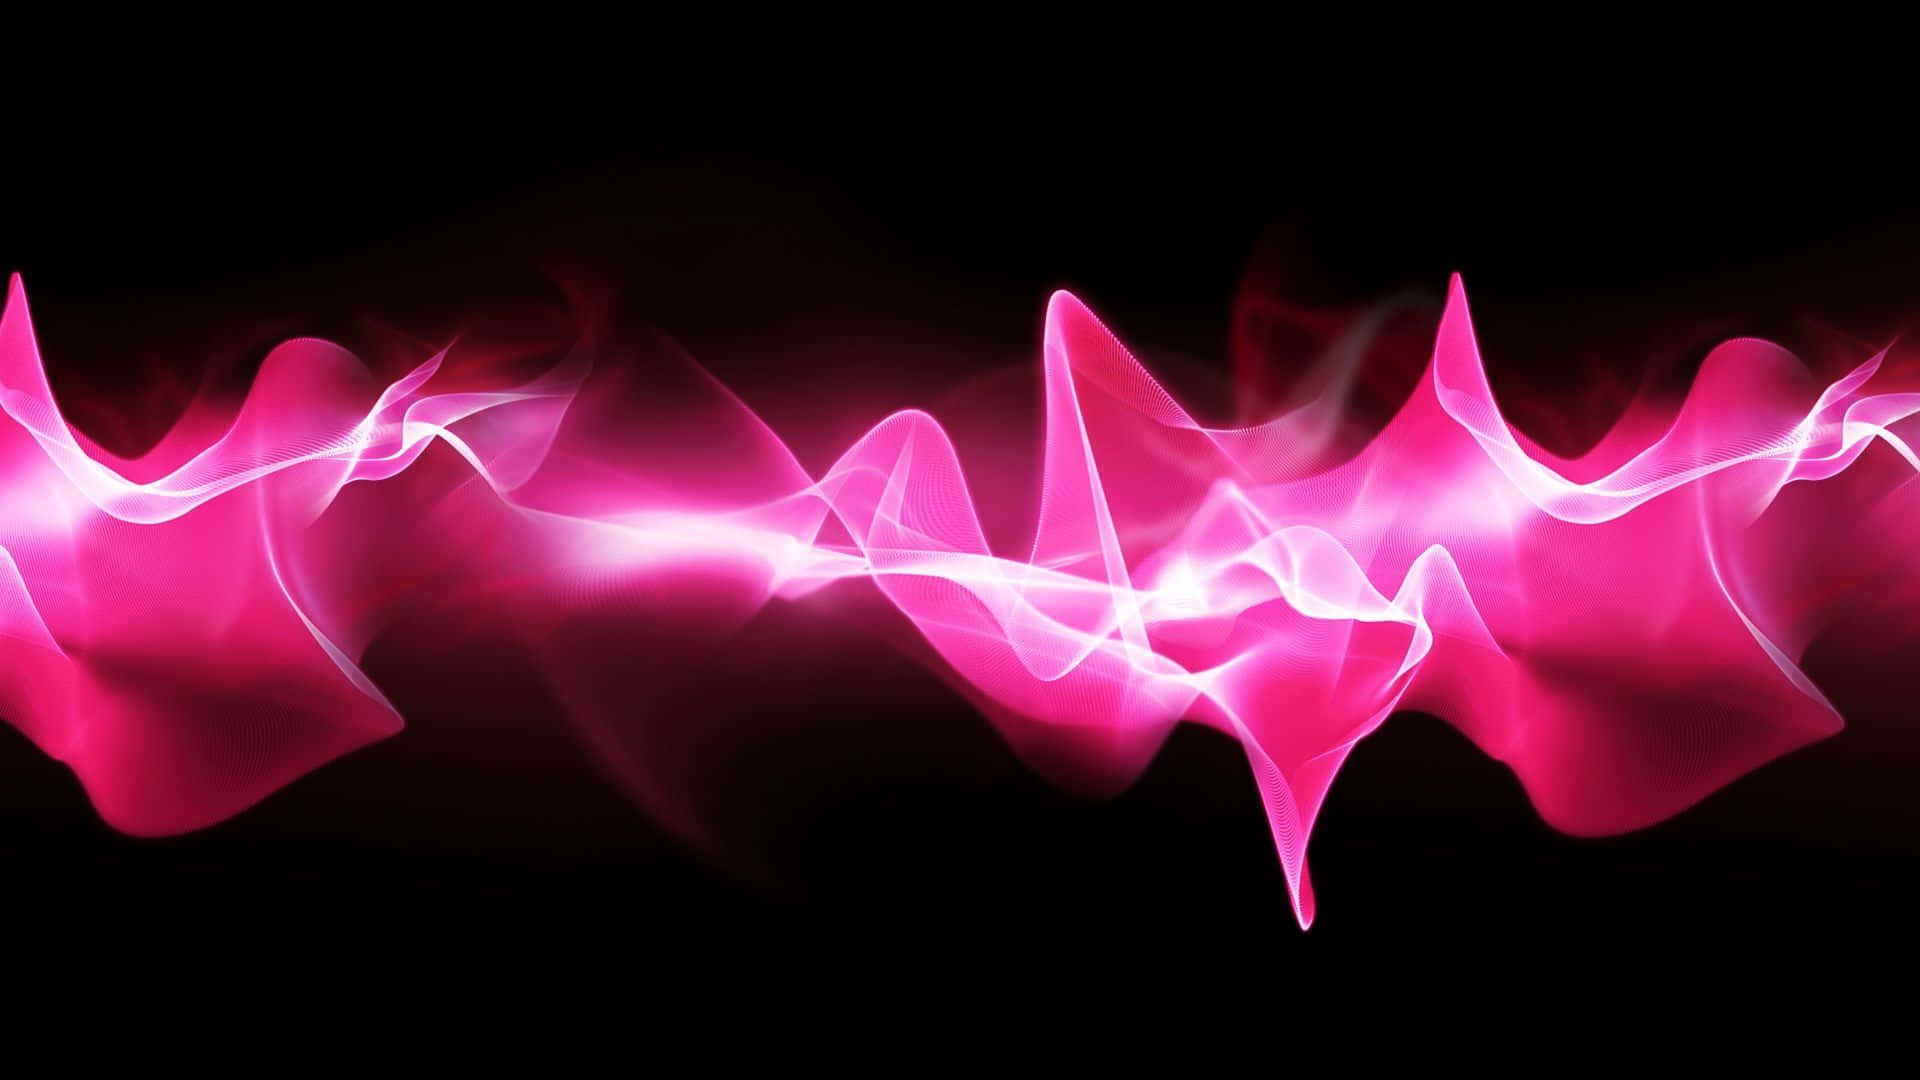 Psychedelic Abstract Pink And Black Background